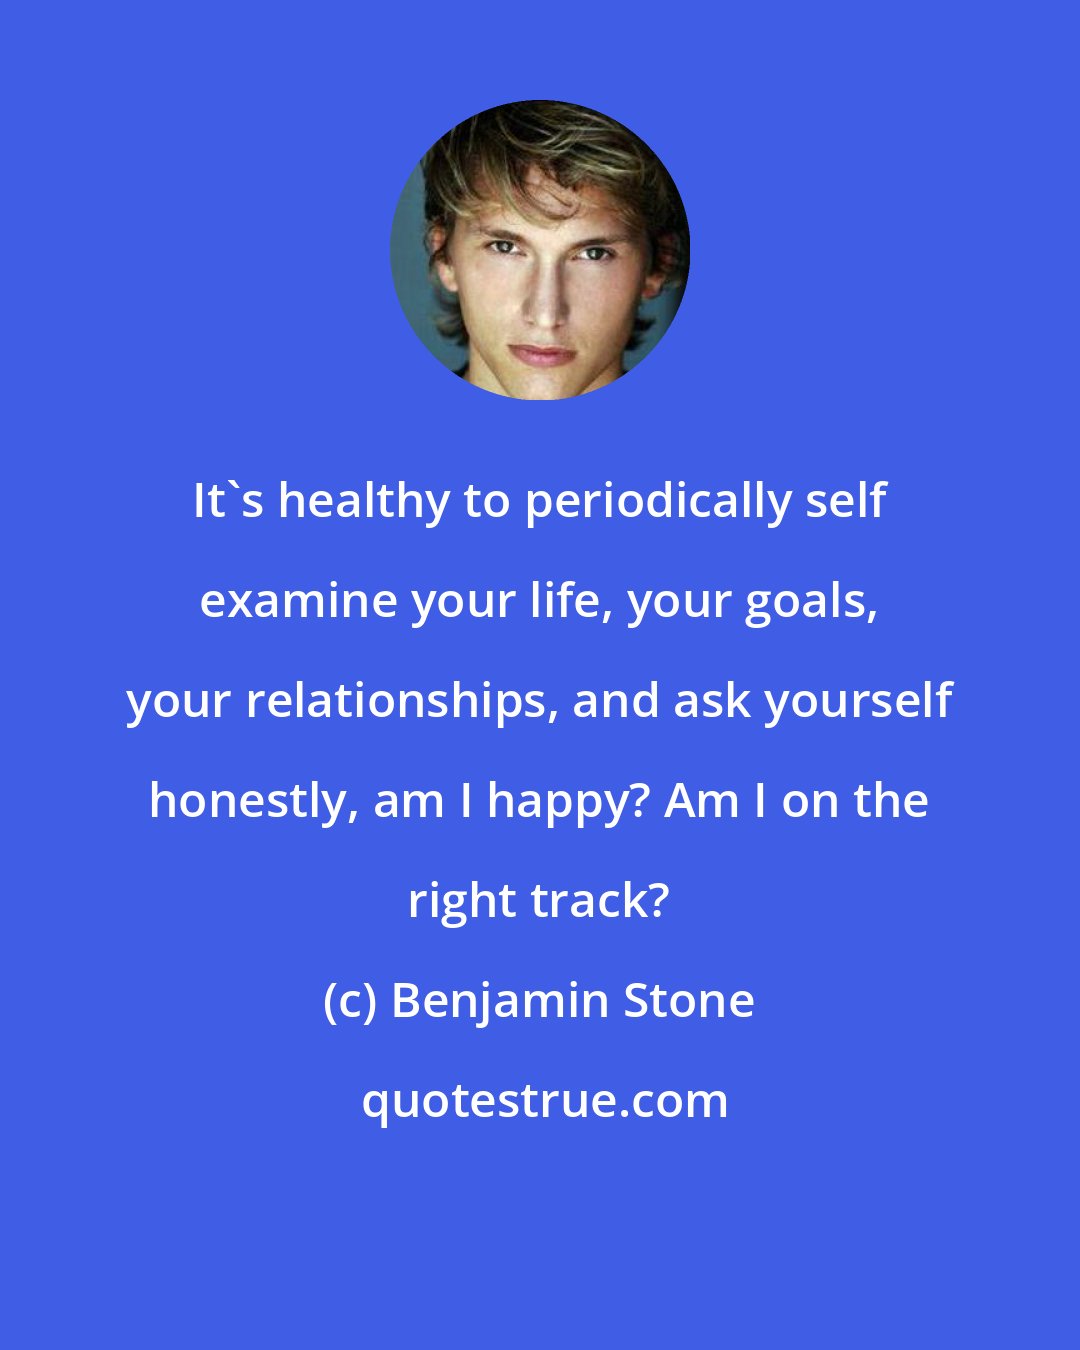 Benjamin Stone: It's healthy to periodically self examine your life, your goals, your relationships, and ask yourself honestly, am I happy? Am I on the right track?